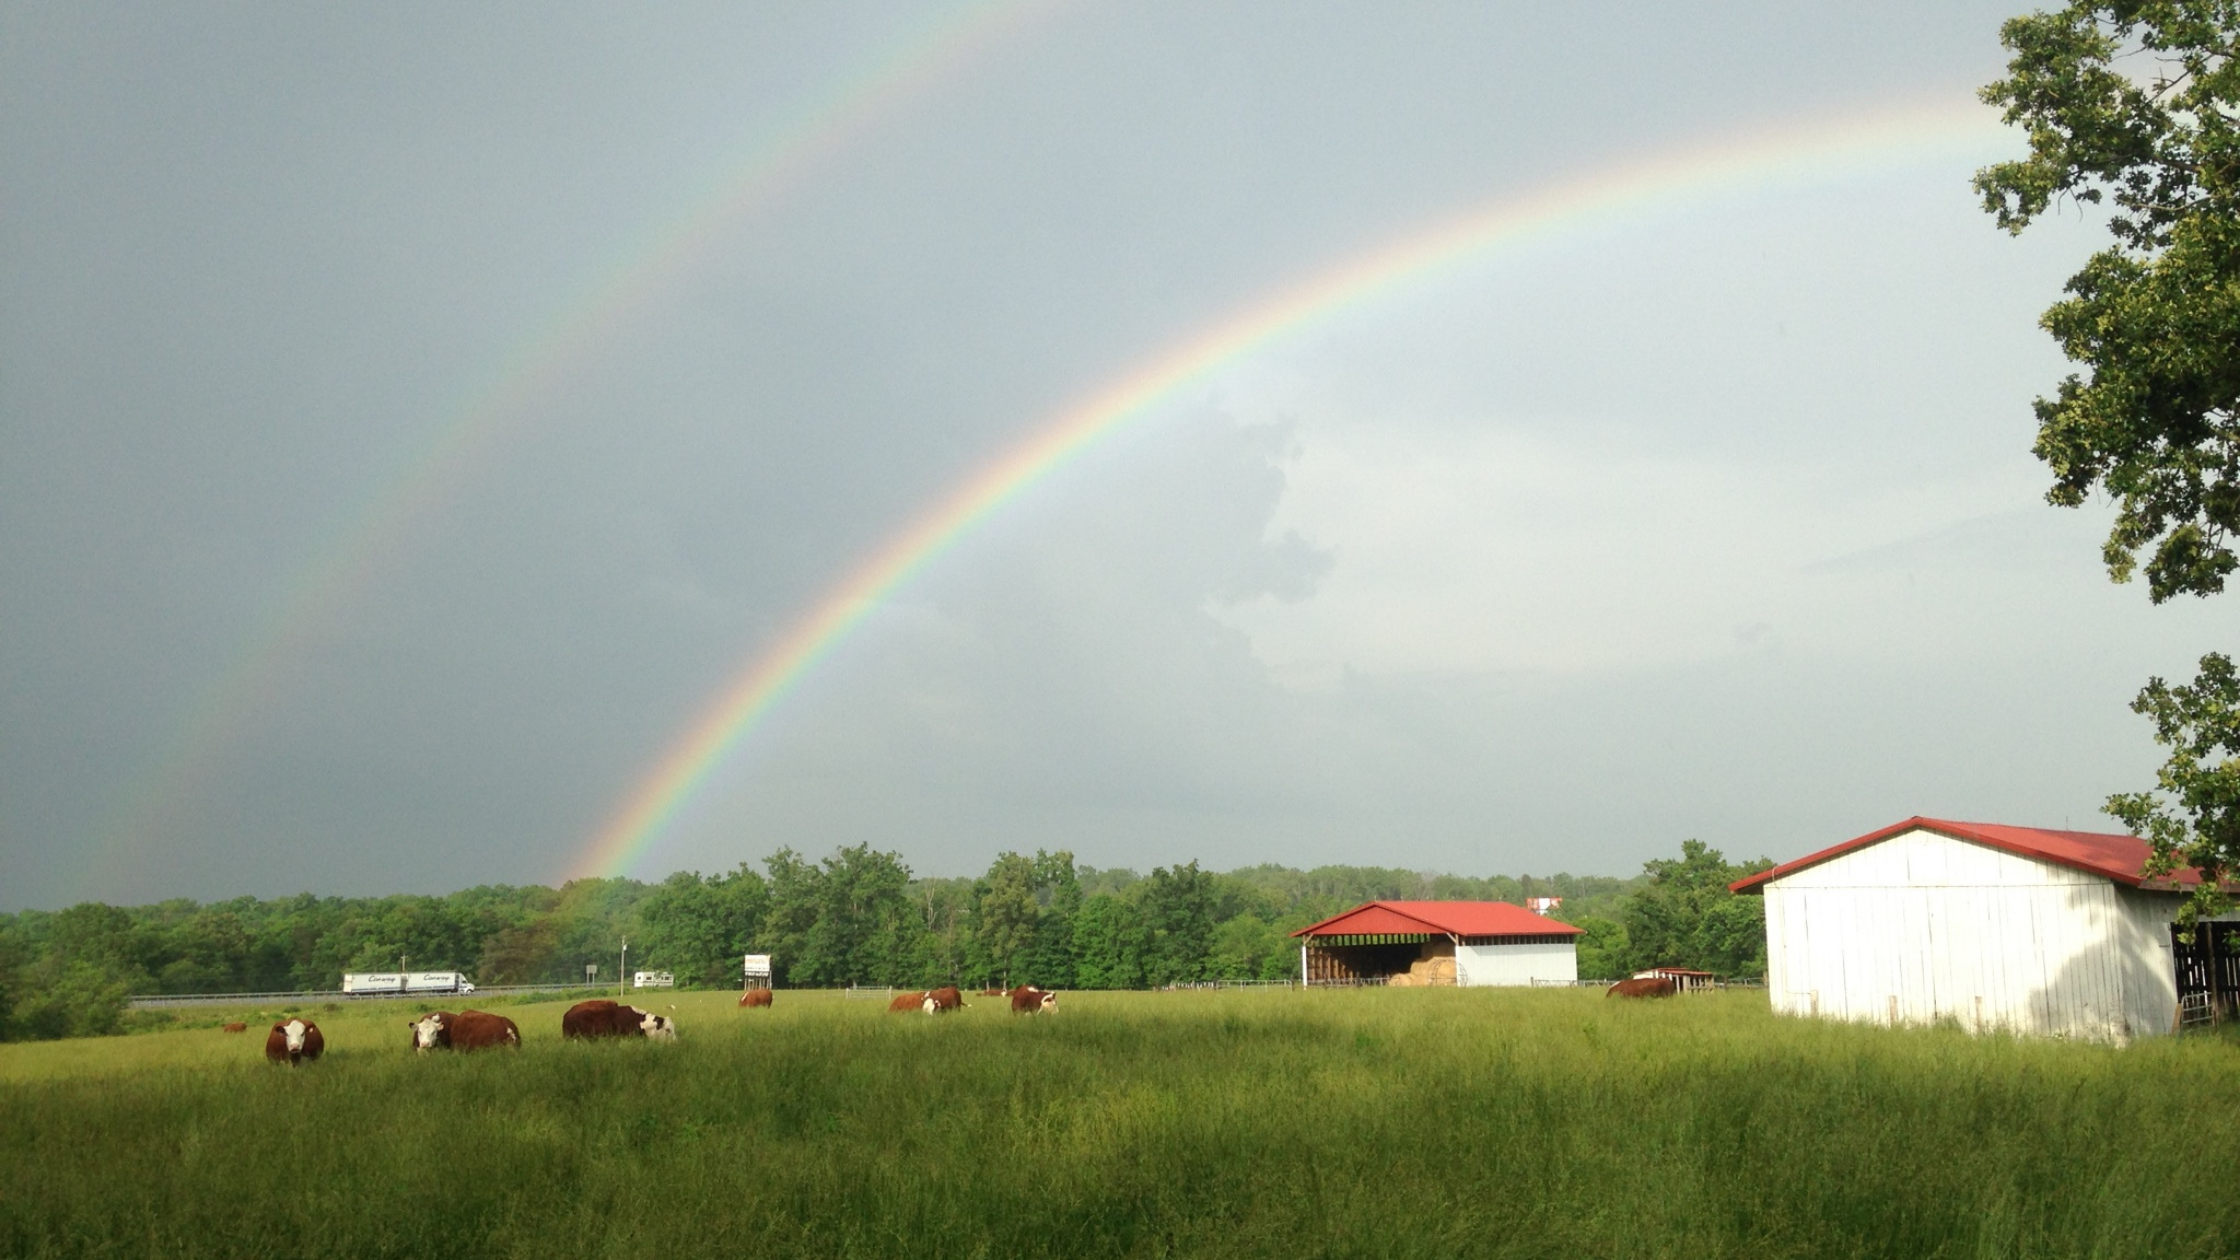 Rainbow over barn and cows on farmland in Tennessee